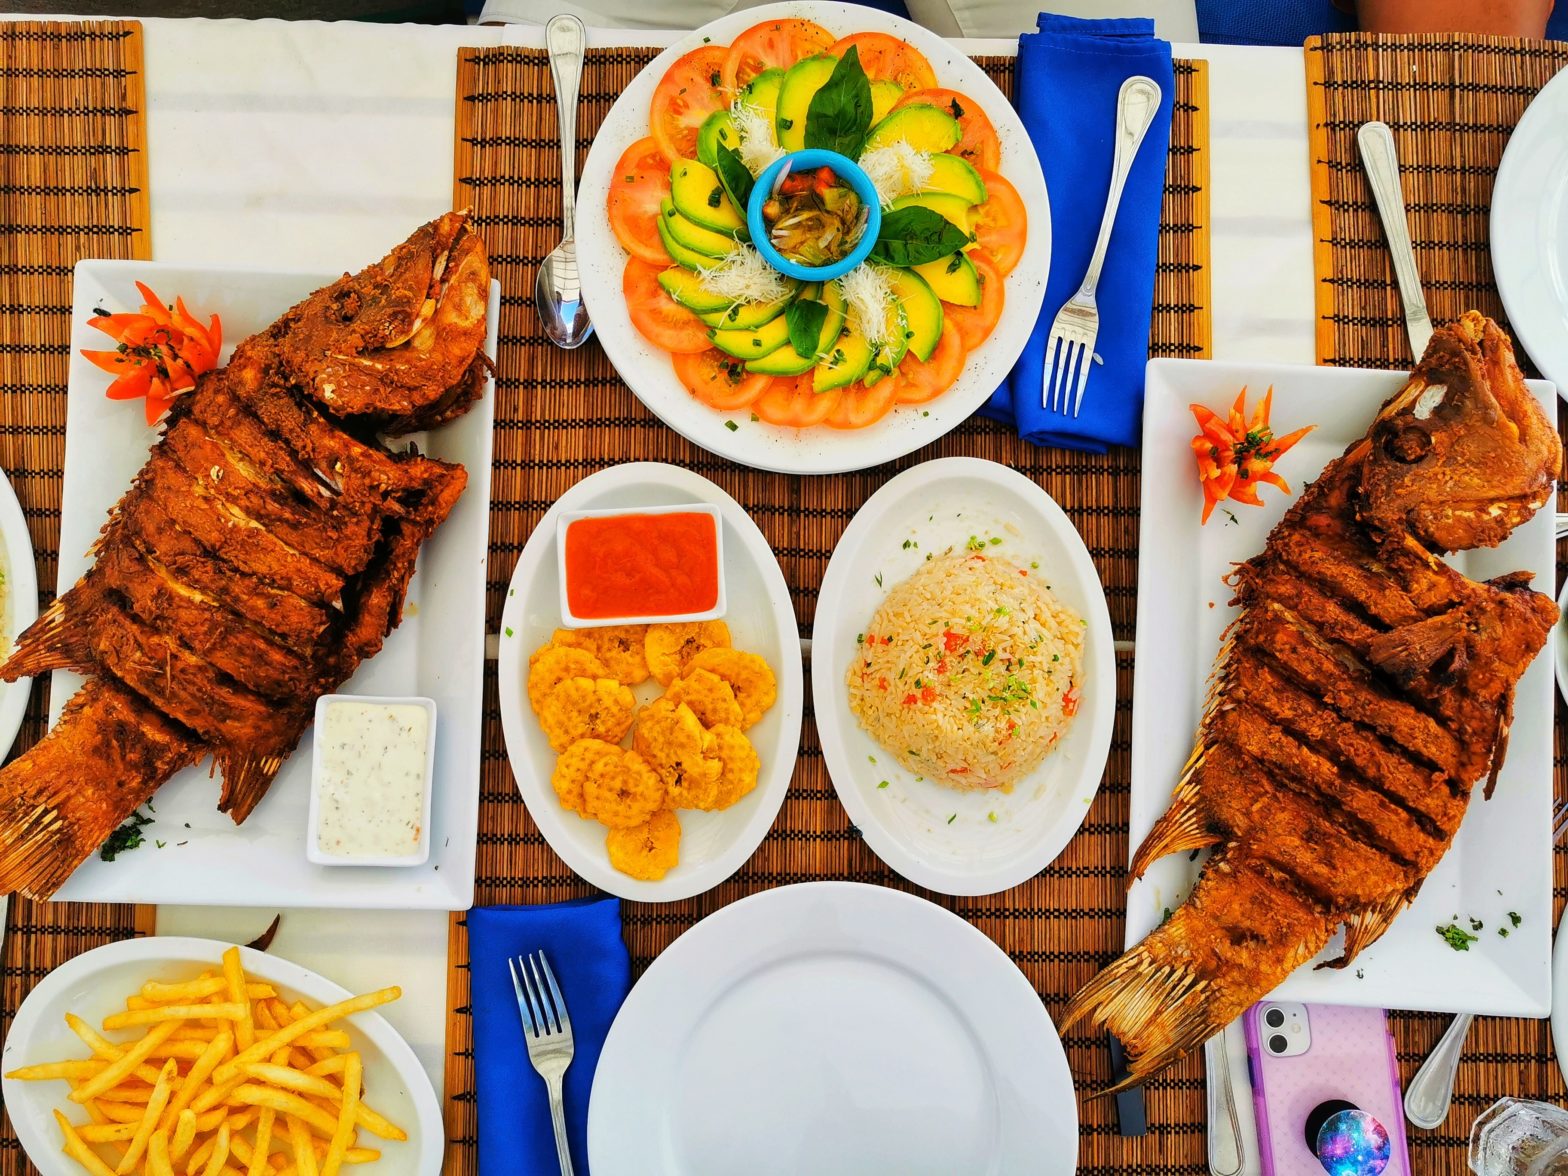 Enjoy The National Dishes Of These Six Caribbean Islands